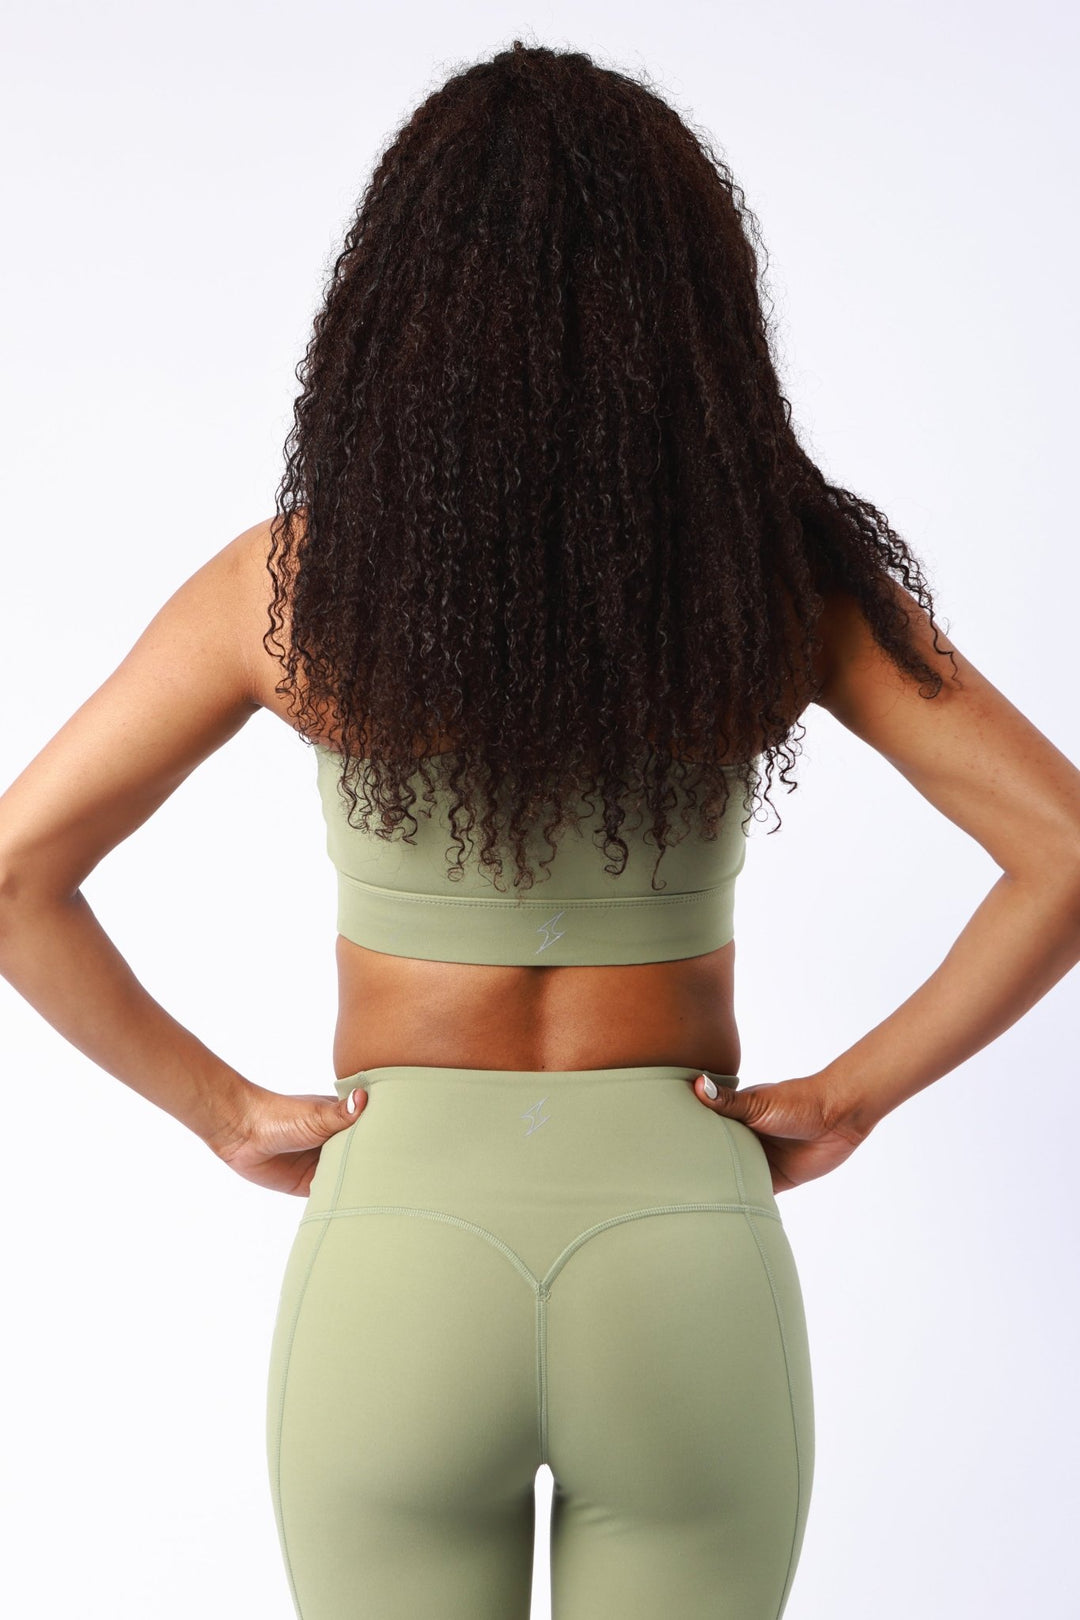 Athletic Women's V Racer Back Bra In Oil Green - attivousa Free Shipping over $75 Womens Activewear Attivo